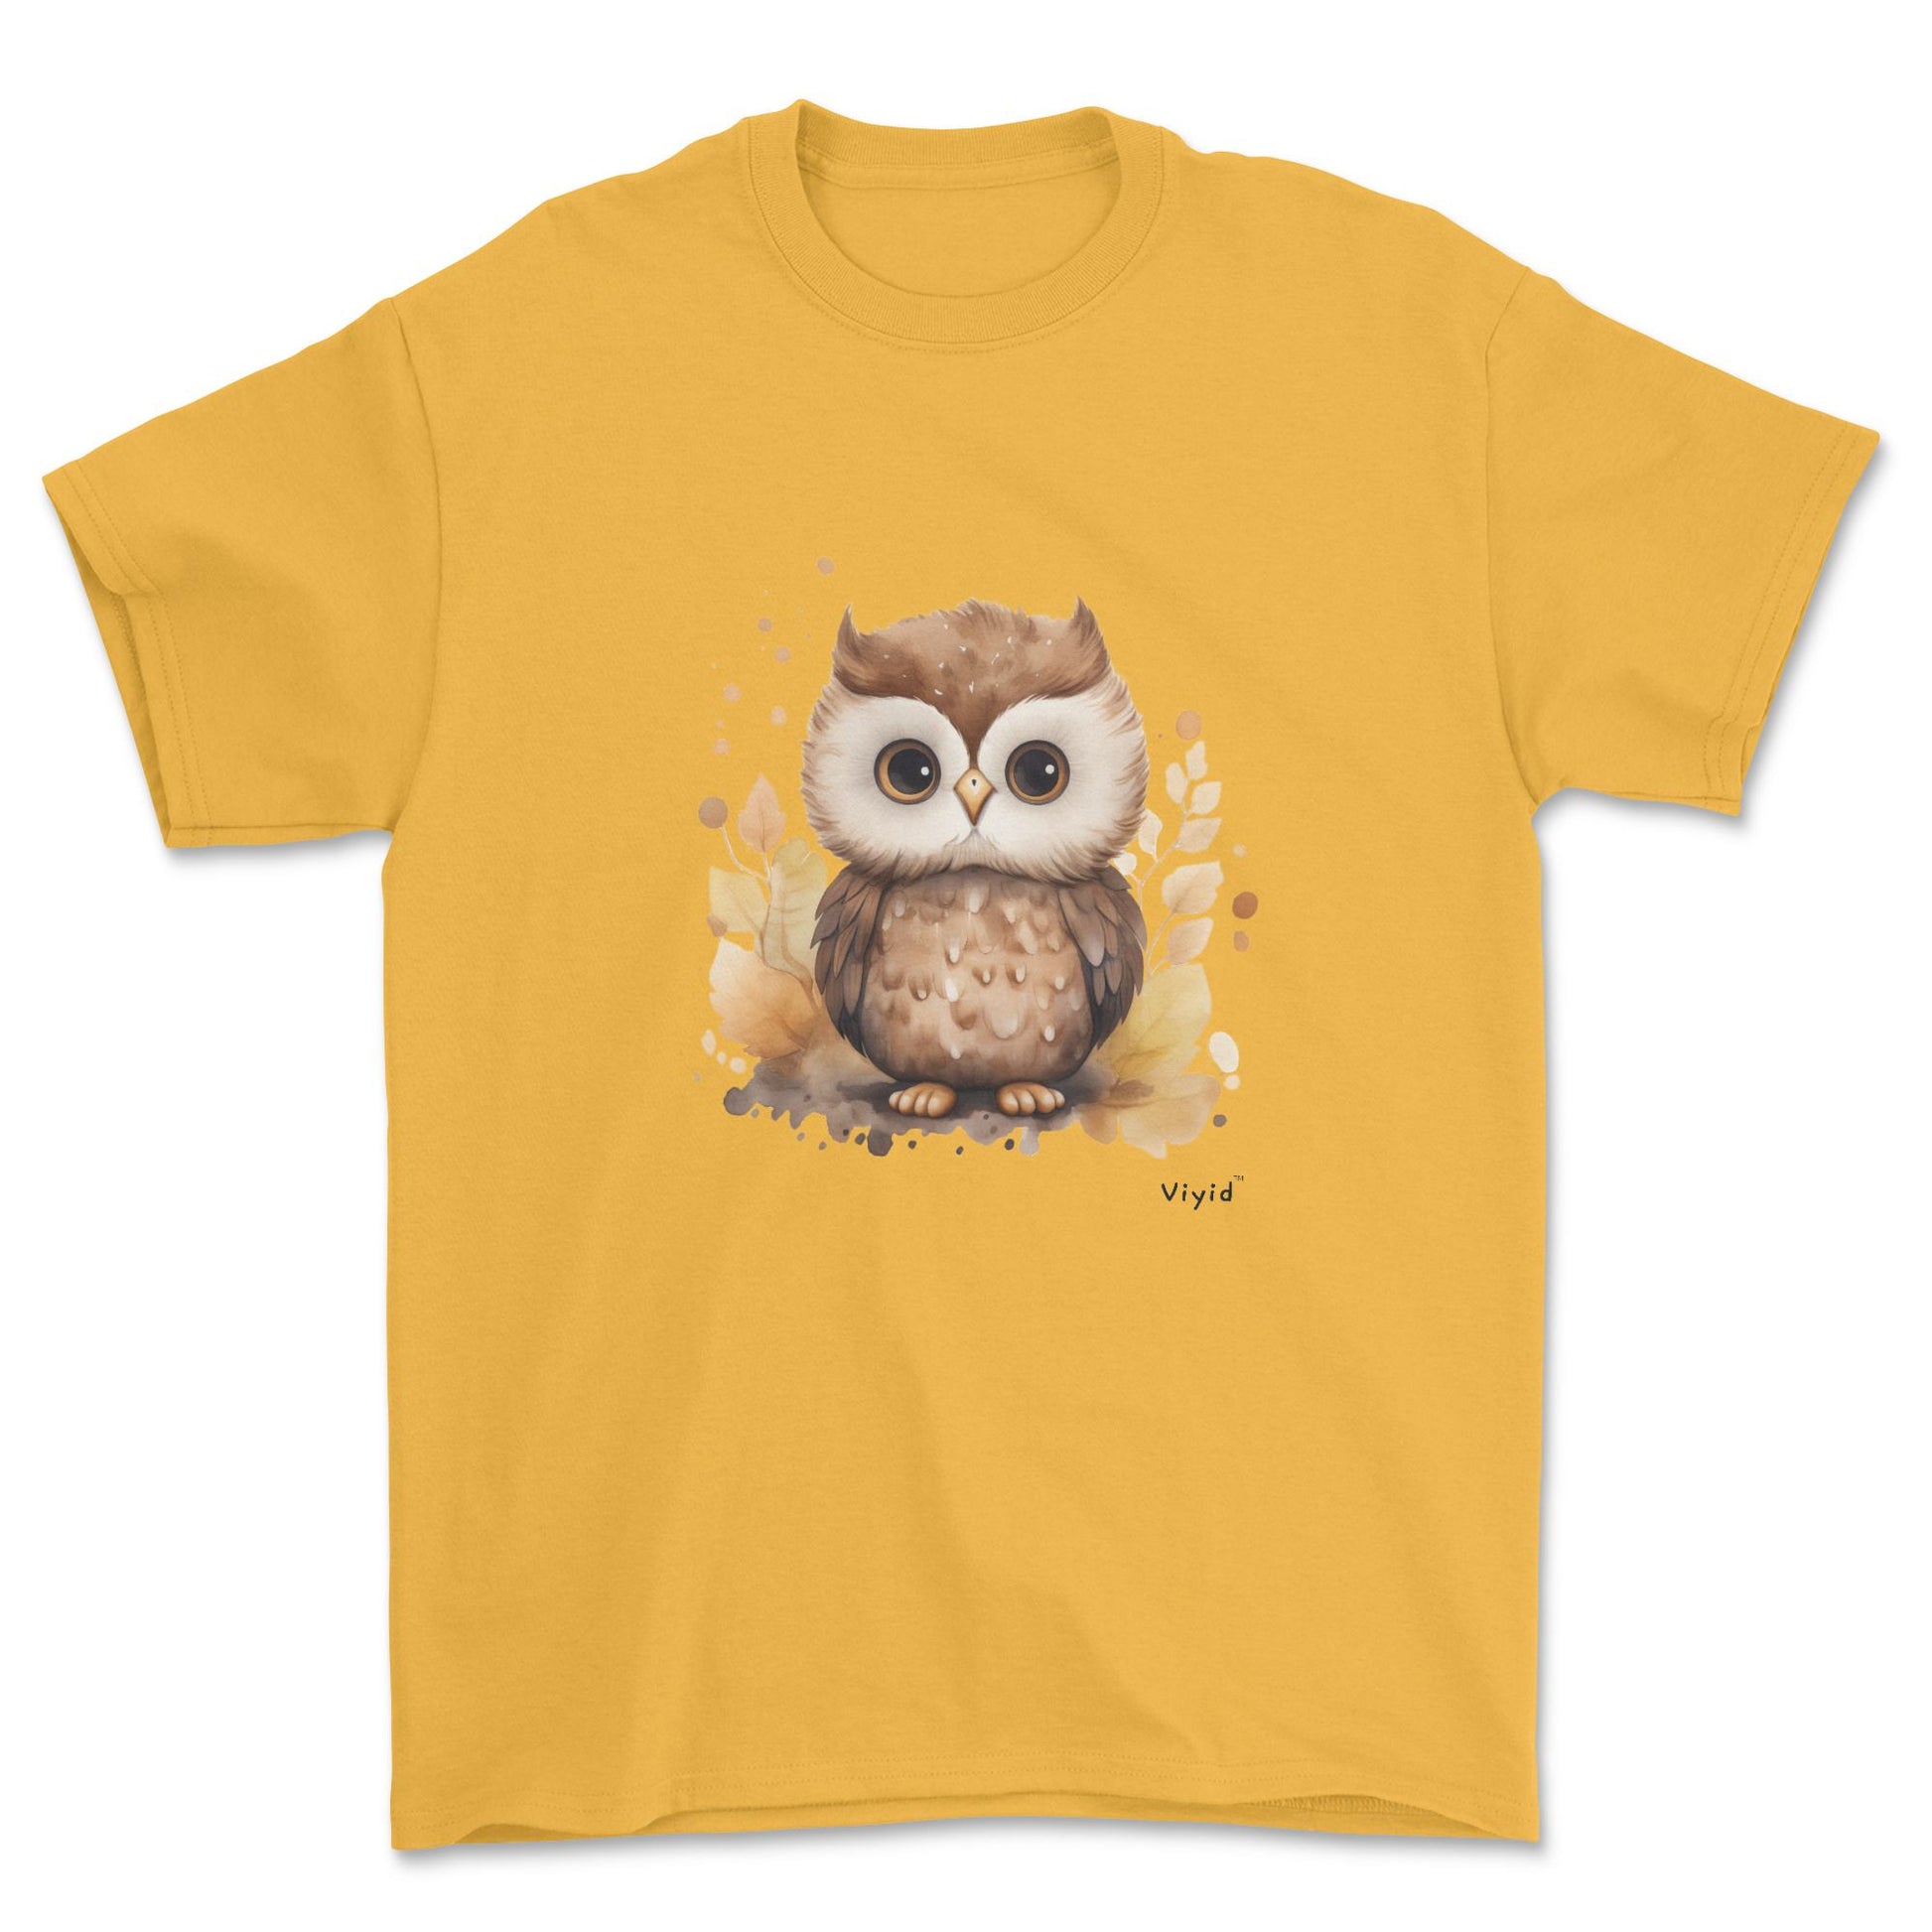 nocturnal owl adult t-shirt gold